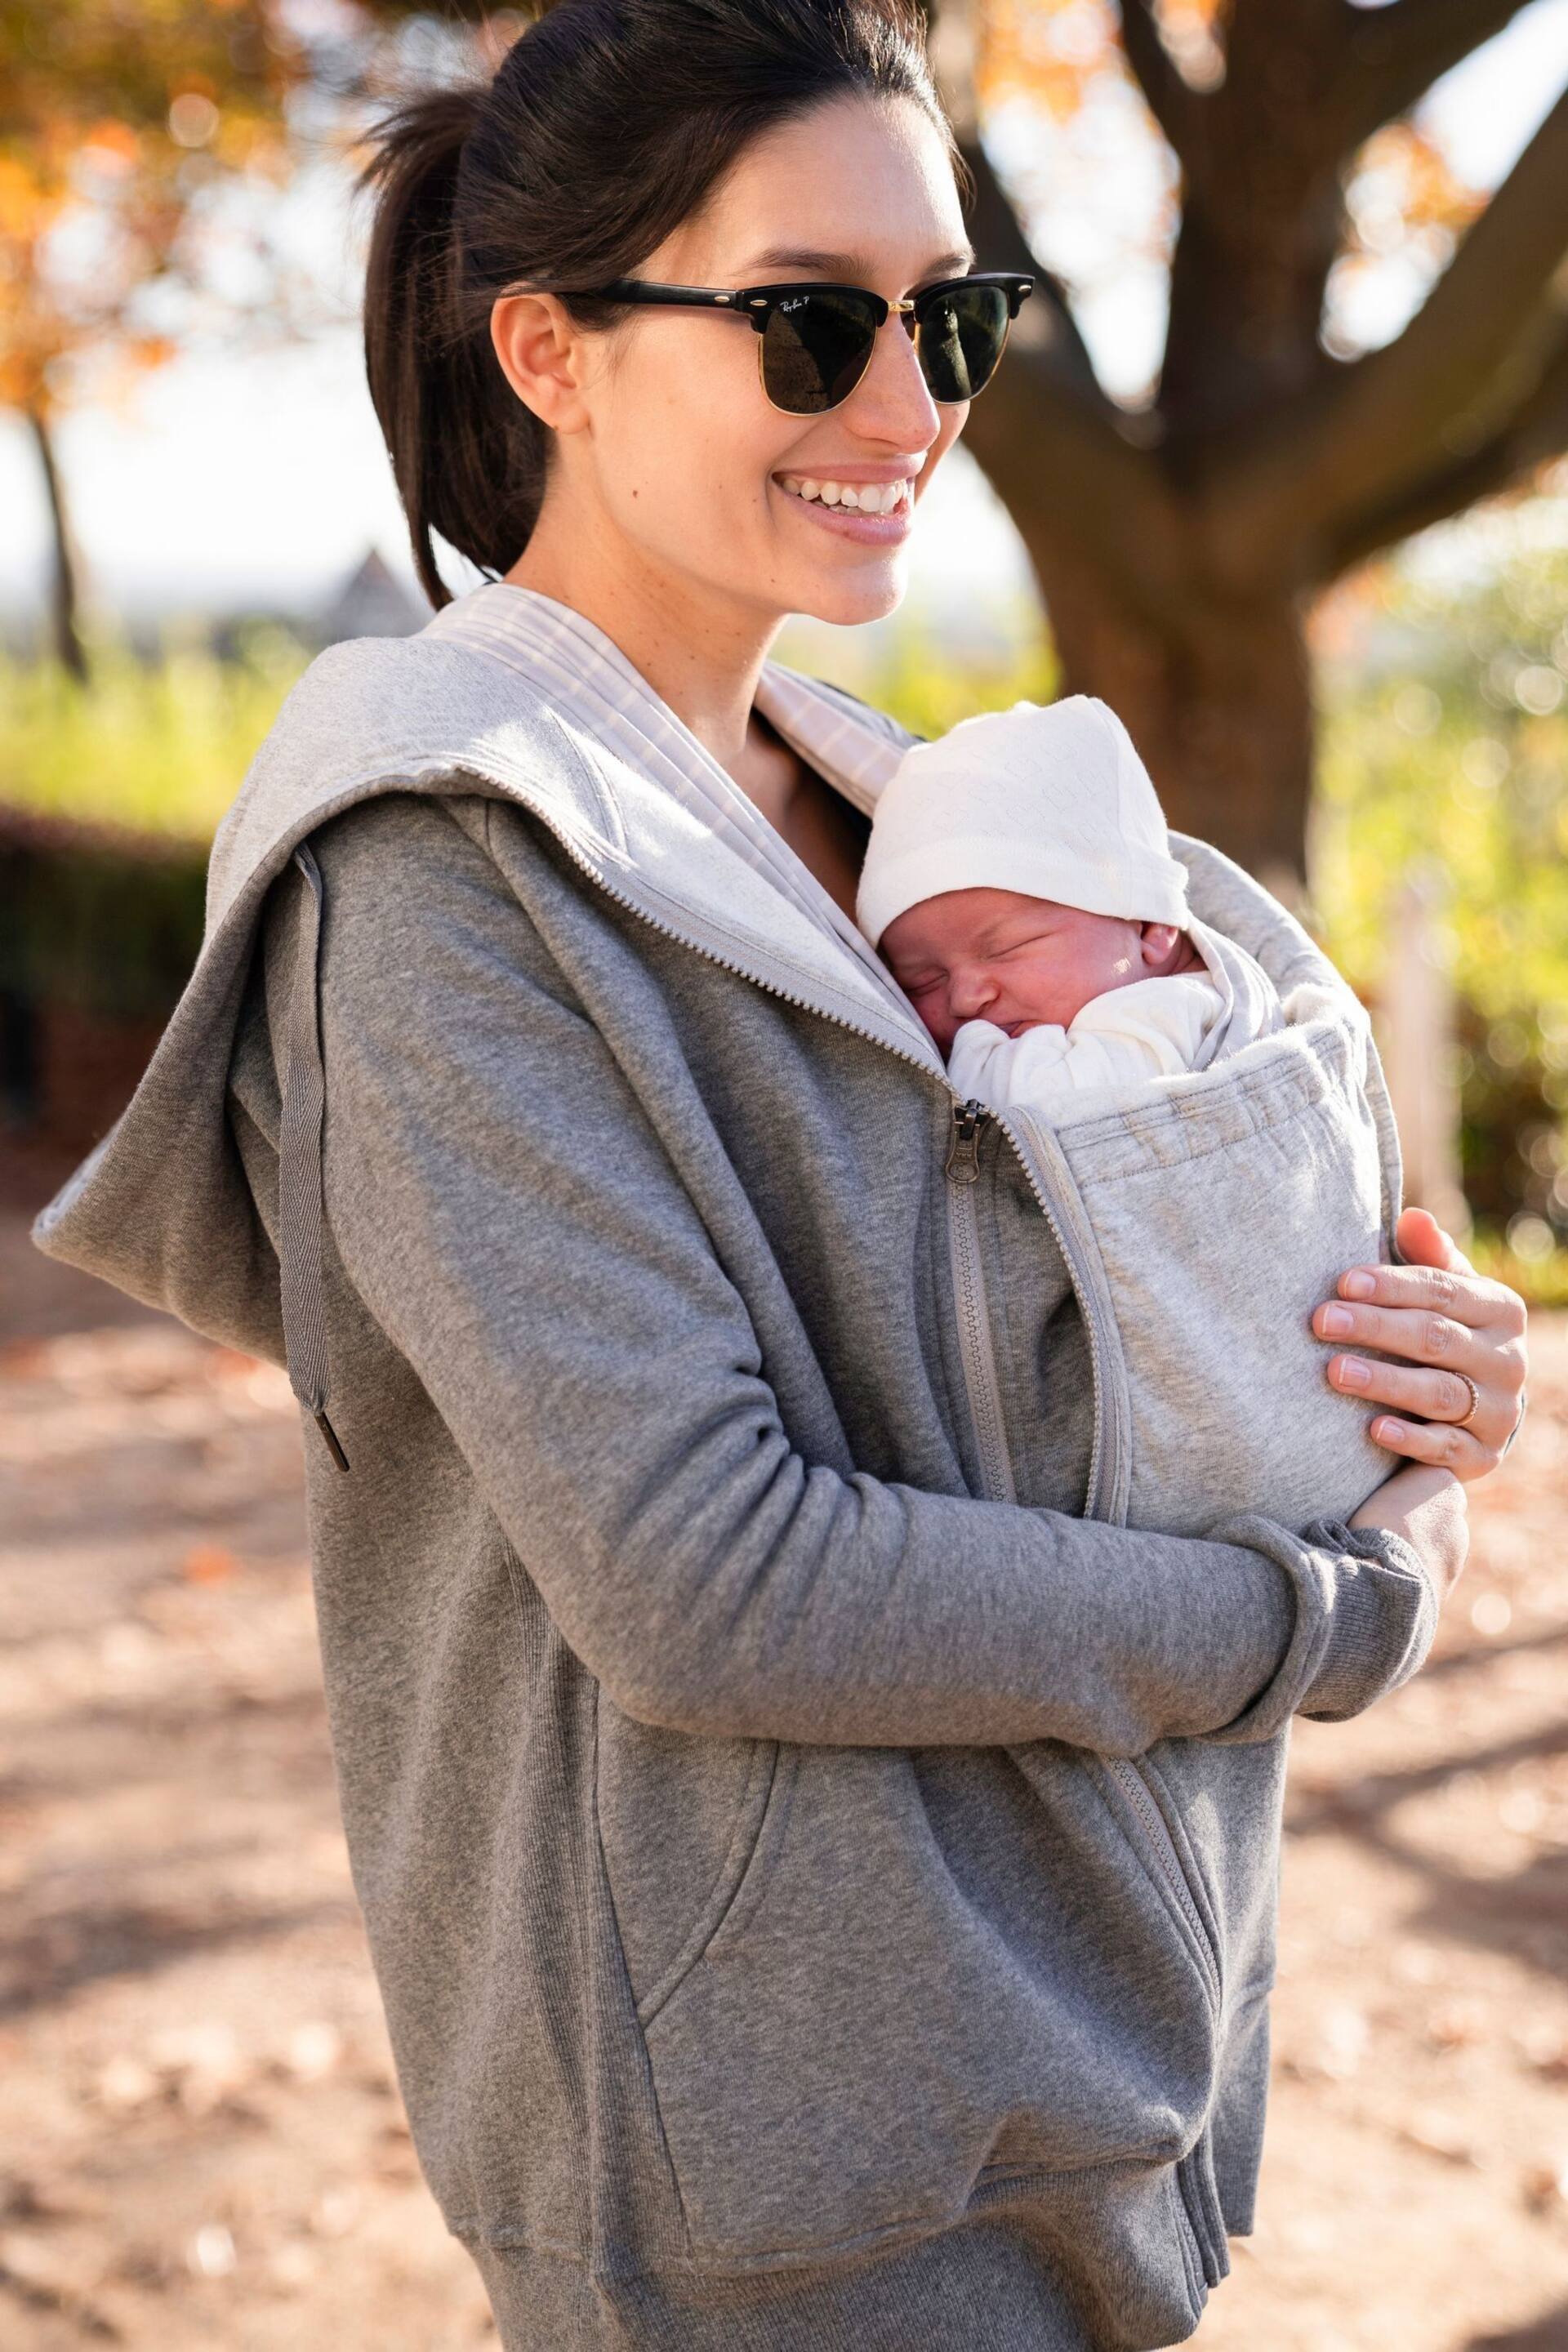 Seraphine Grey Cotton Blend 3 in 1 Maternity Hoodie - Image 1 of 5